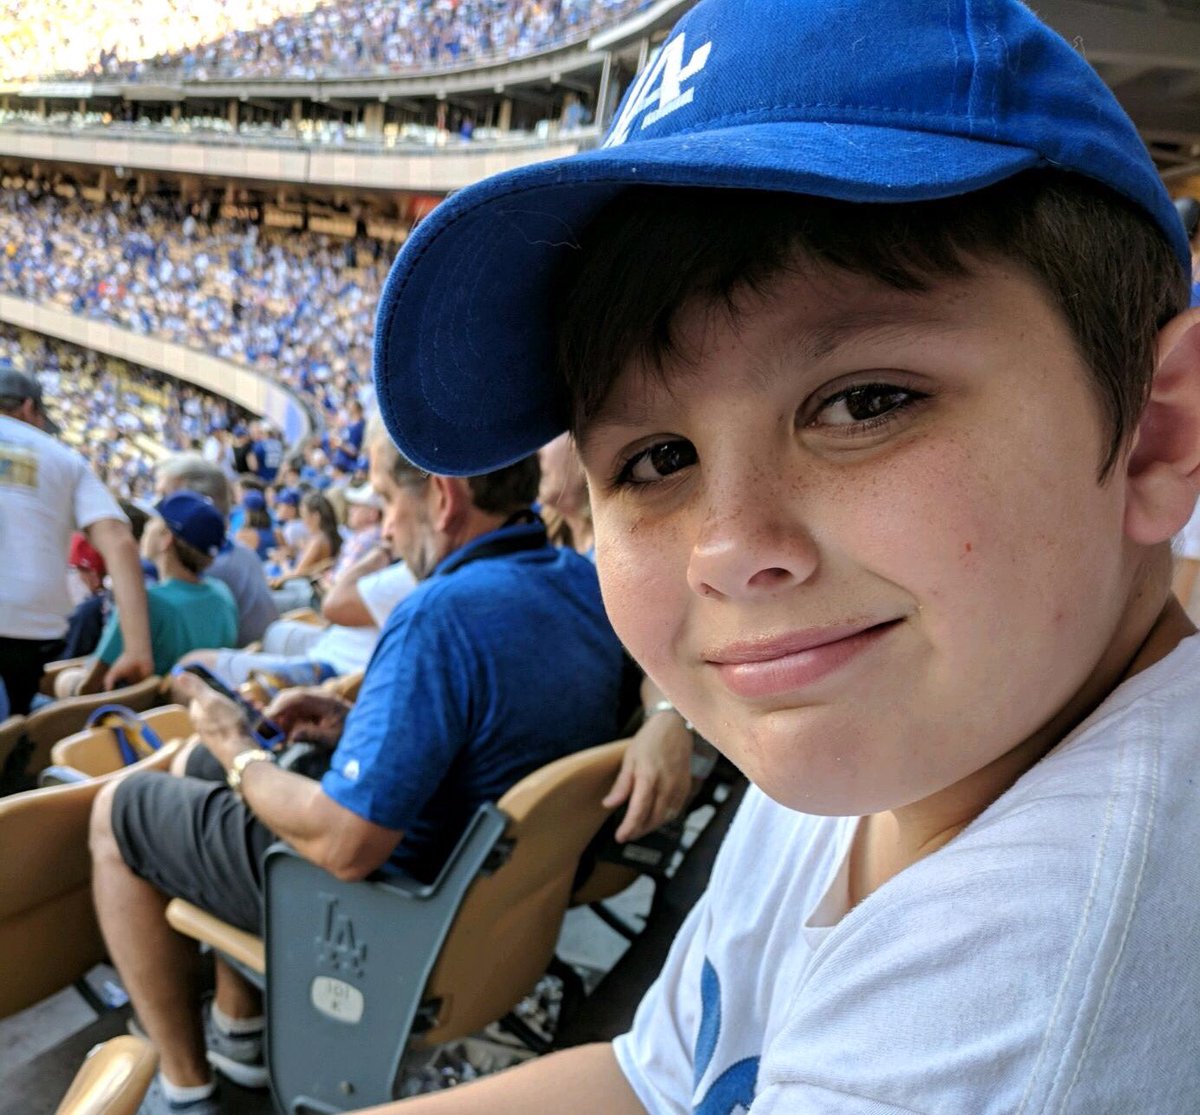 Adam at his first Dodger World Series game. Dodgers for life. #MLBmemorybank